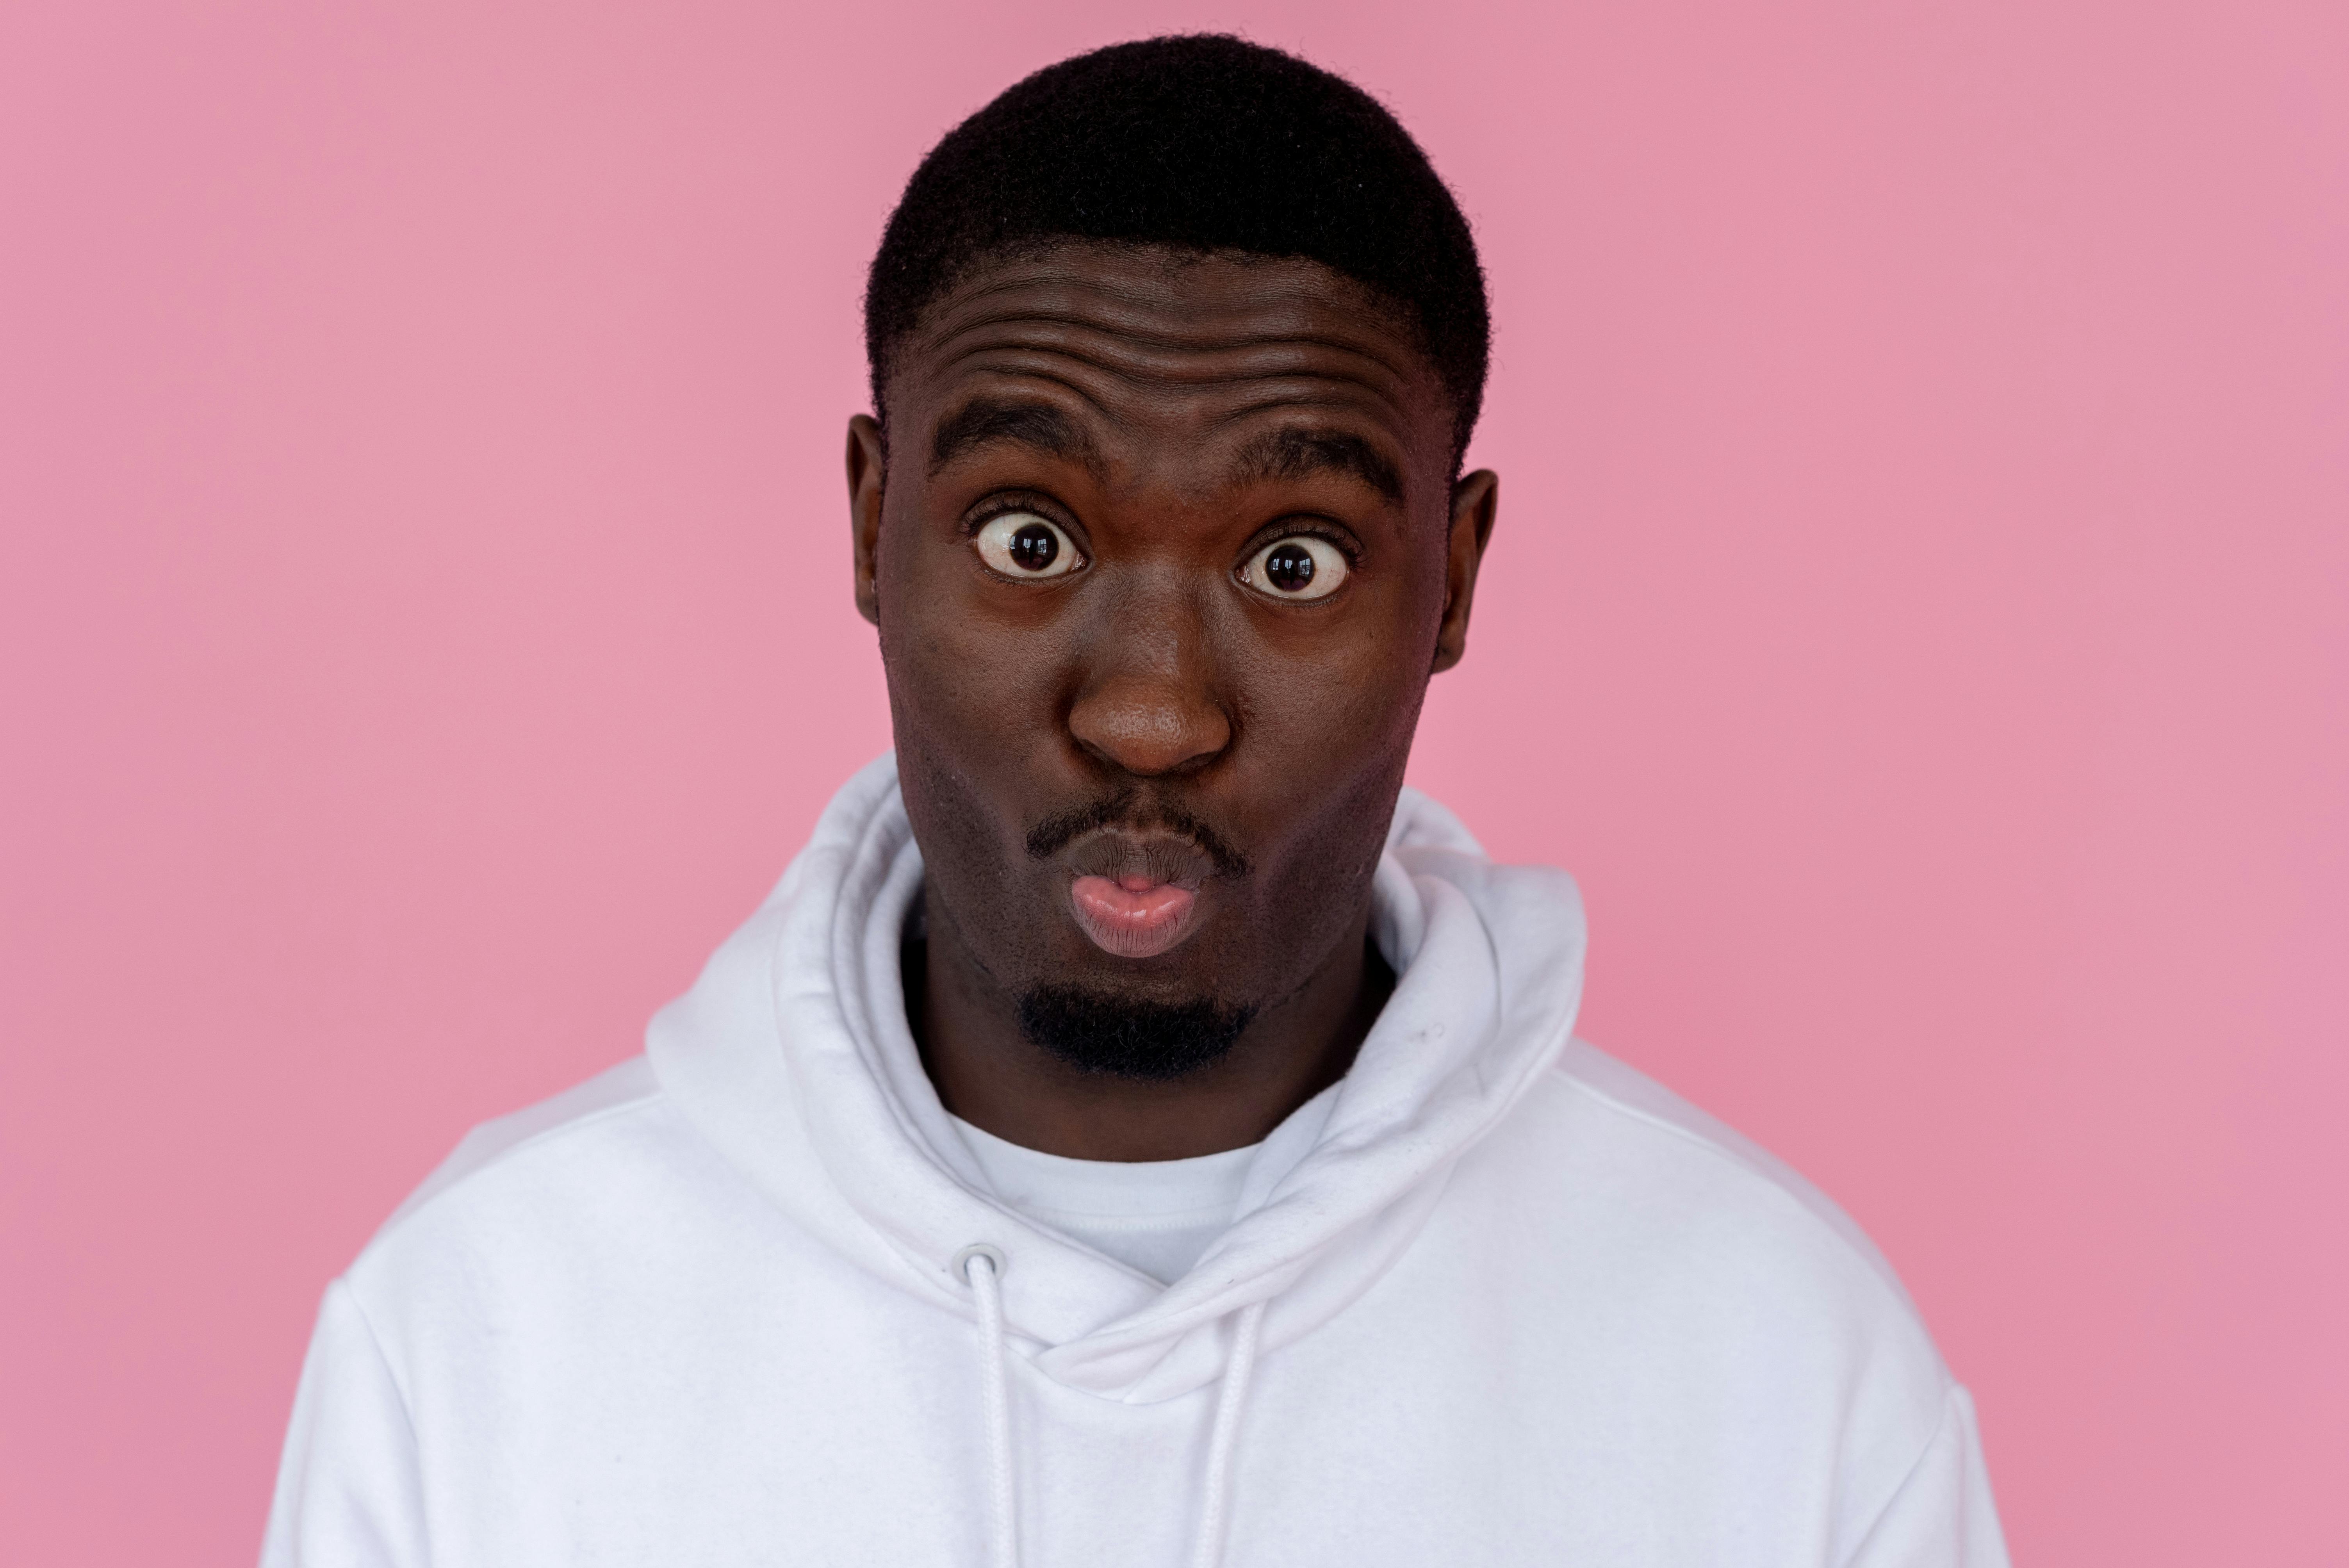 Funny black man making grimace and pouting lips · Free Stock Photo